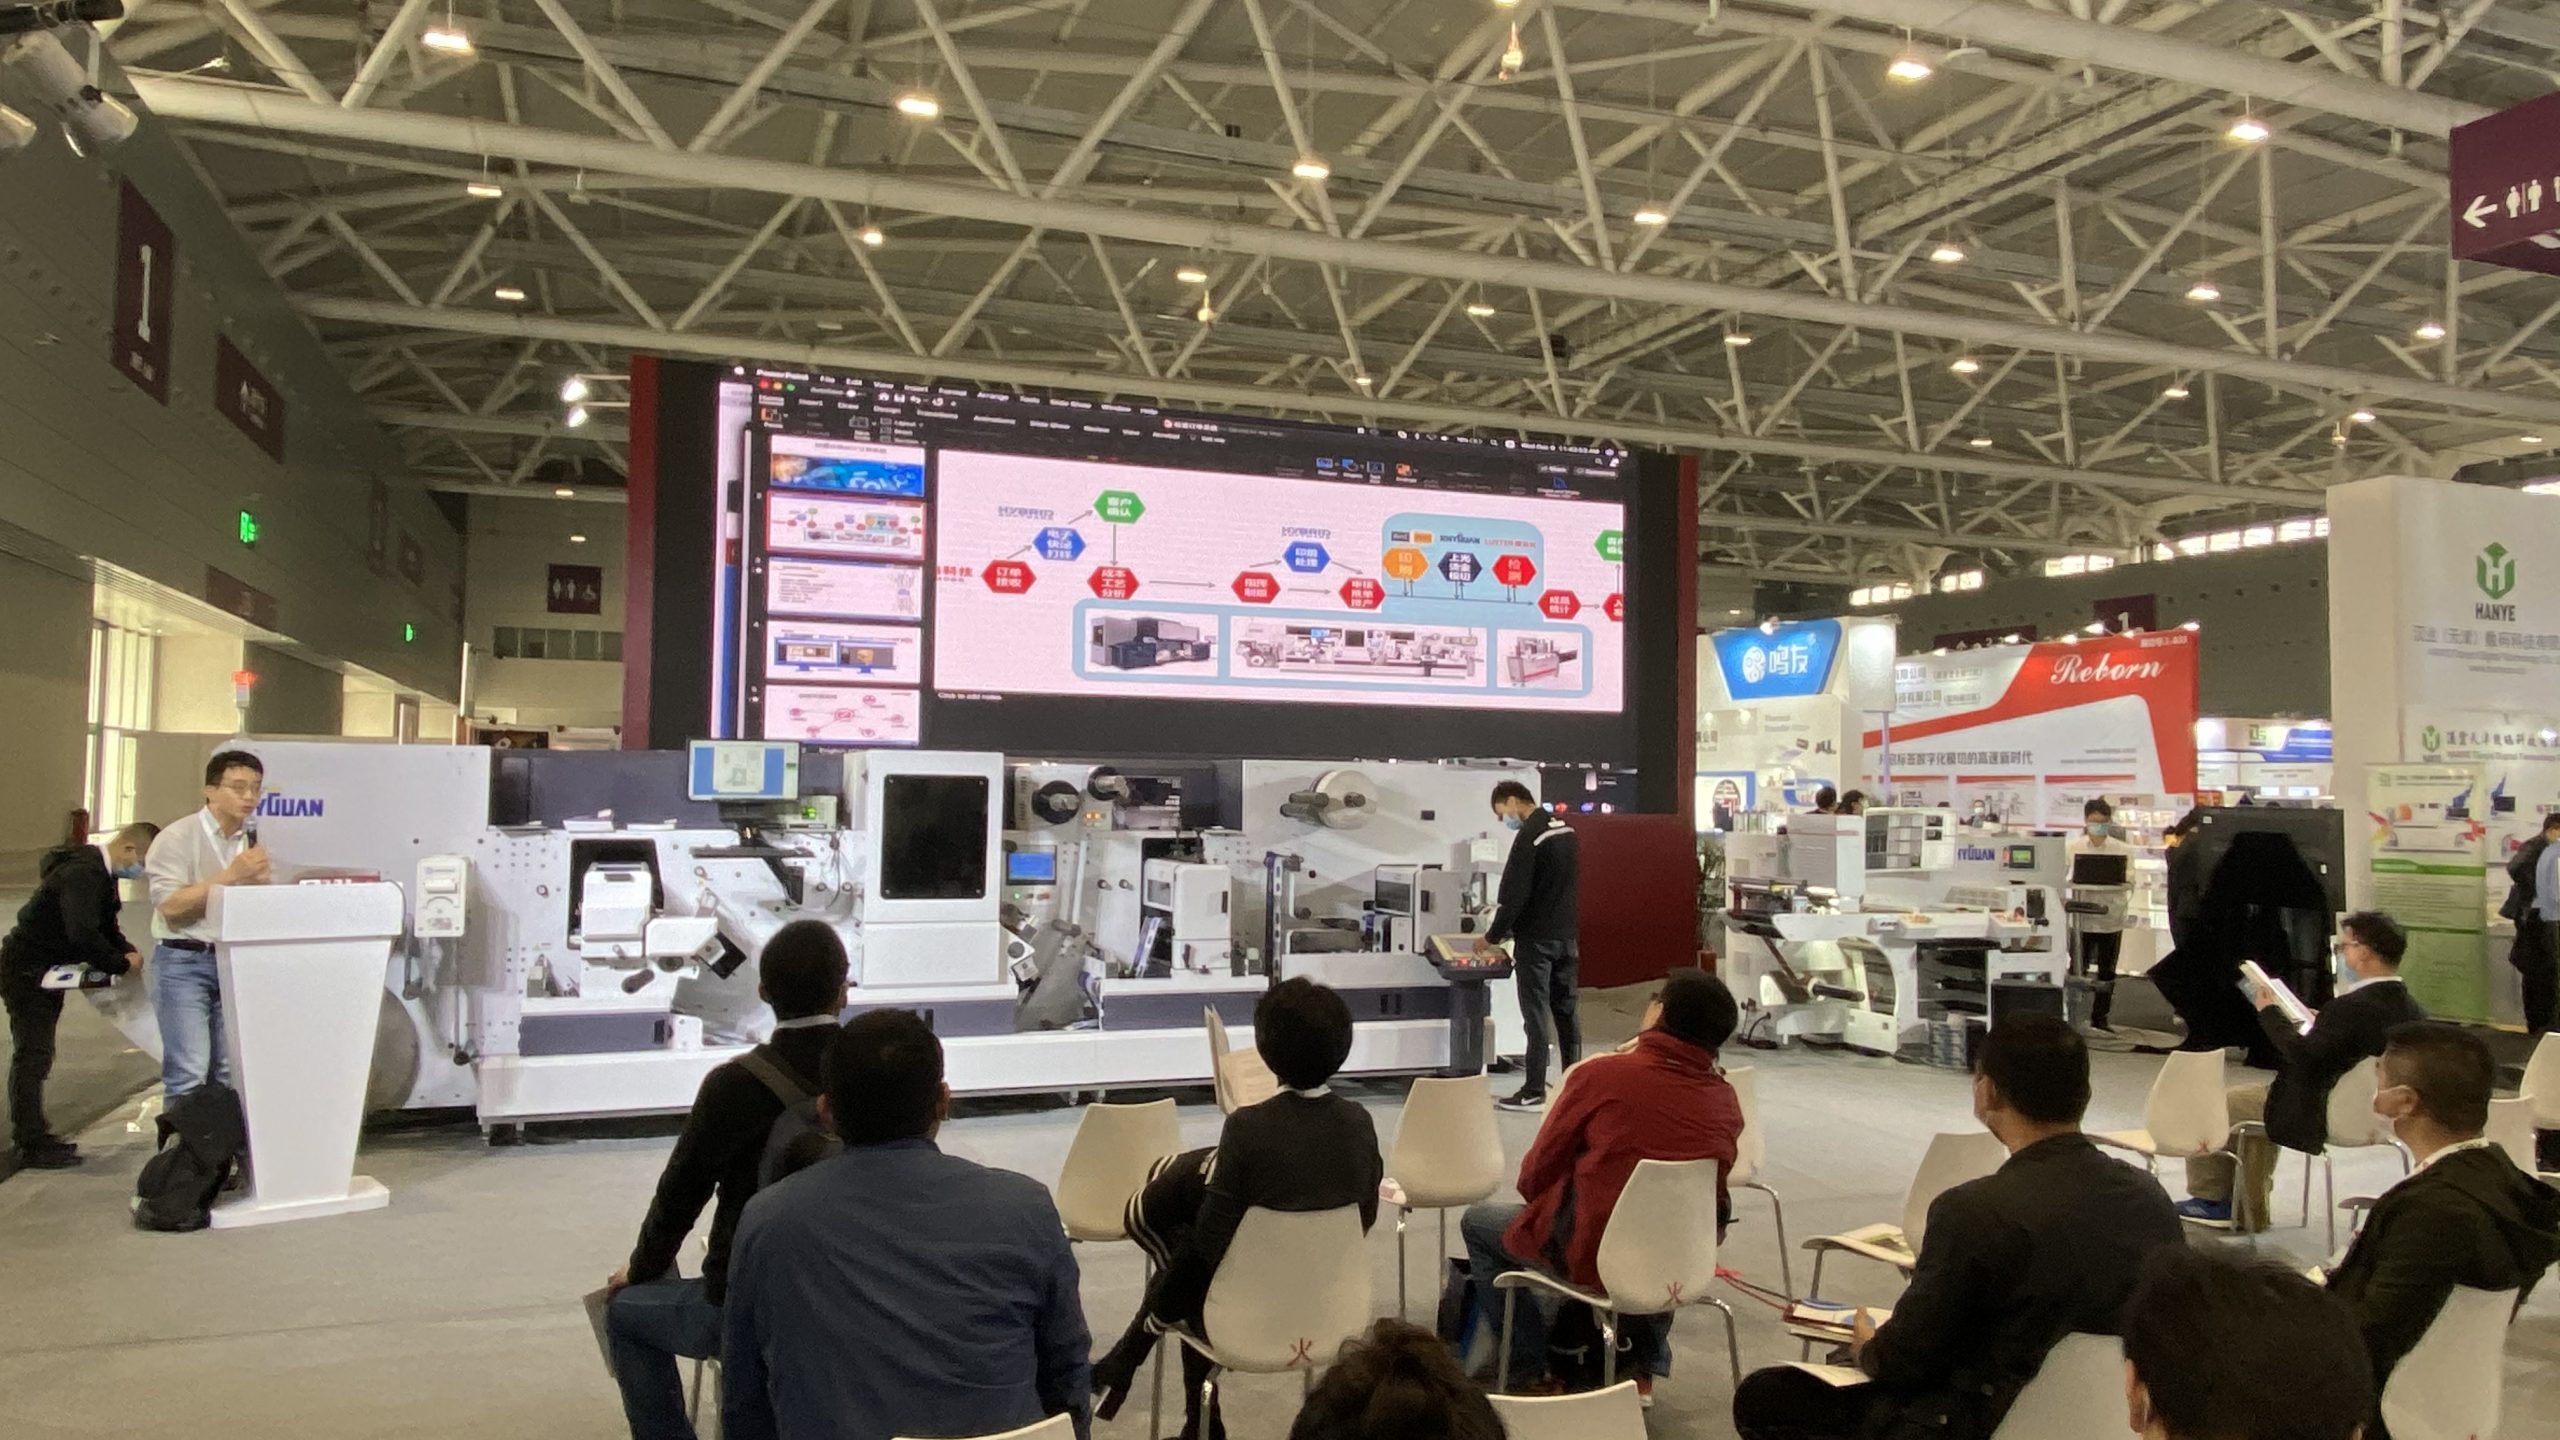 HYBRID Software presentation at Label Expo South China's Industry 4.0 Innovation Hub